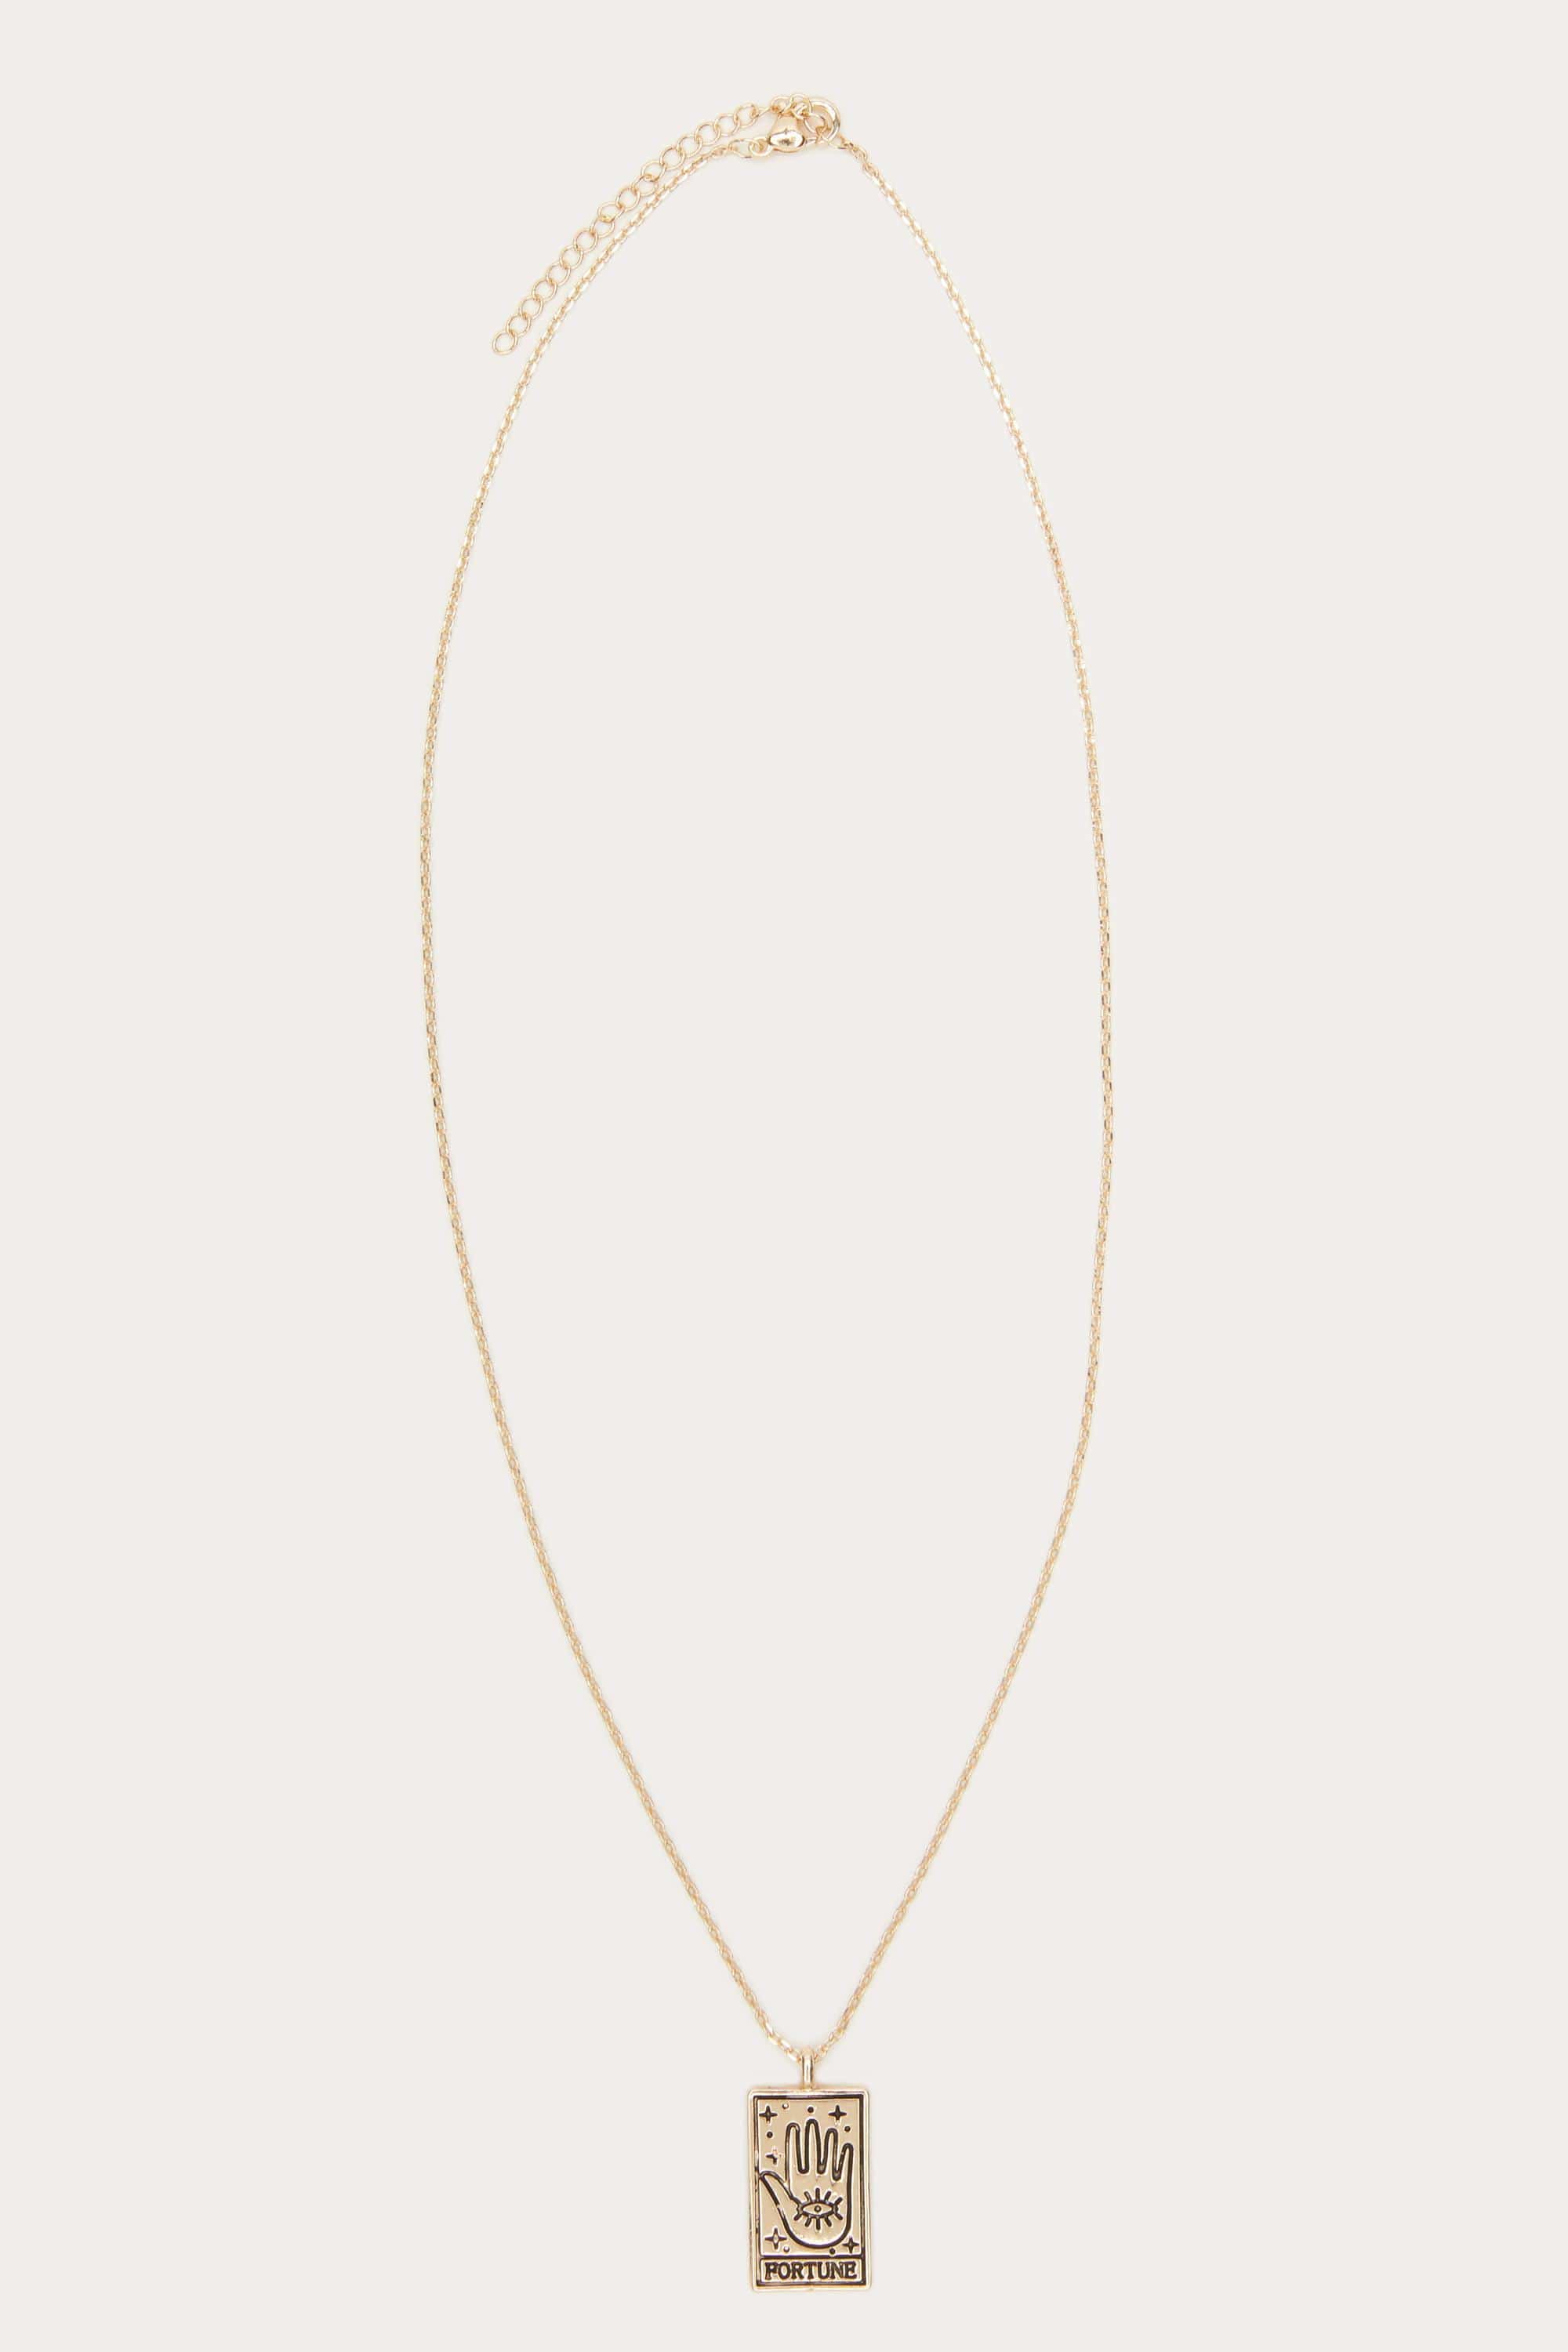 FORTUNE FUTURE NECKLACE NECKLACE PETIT MOMENTS GOLD One Size 